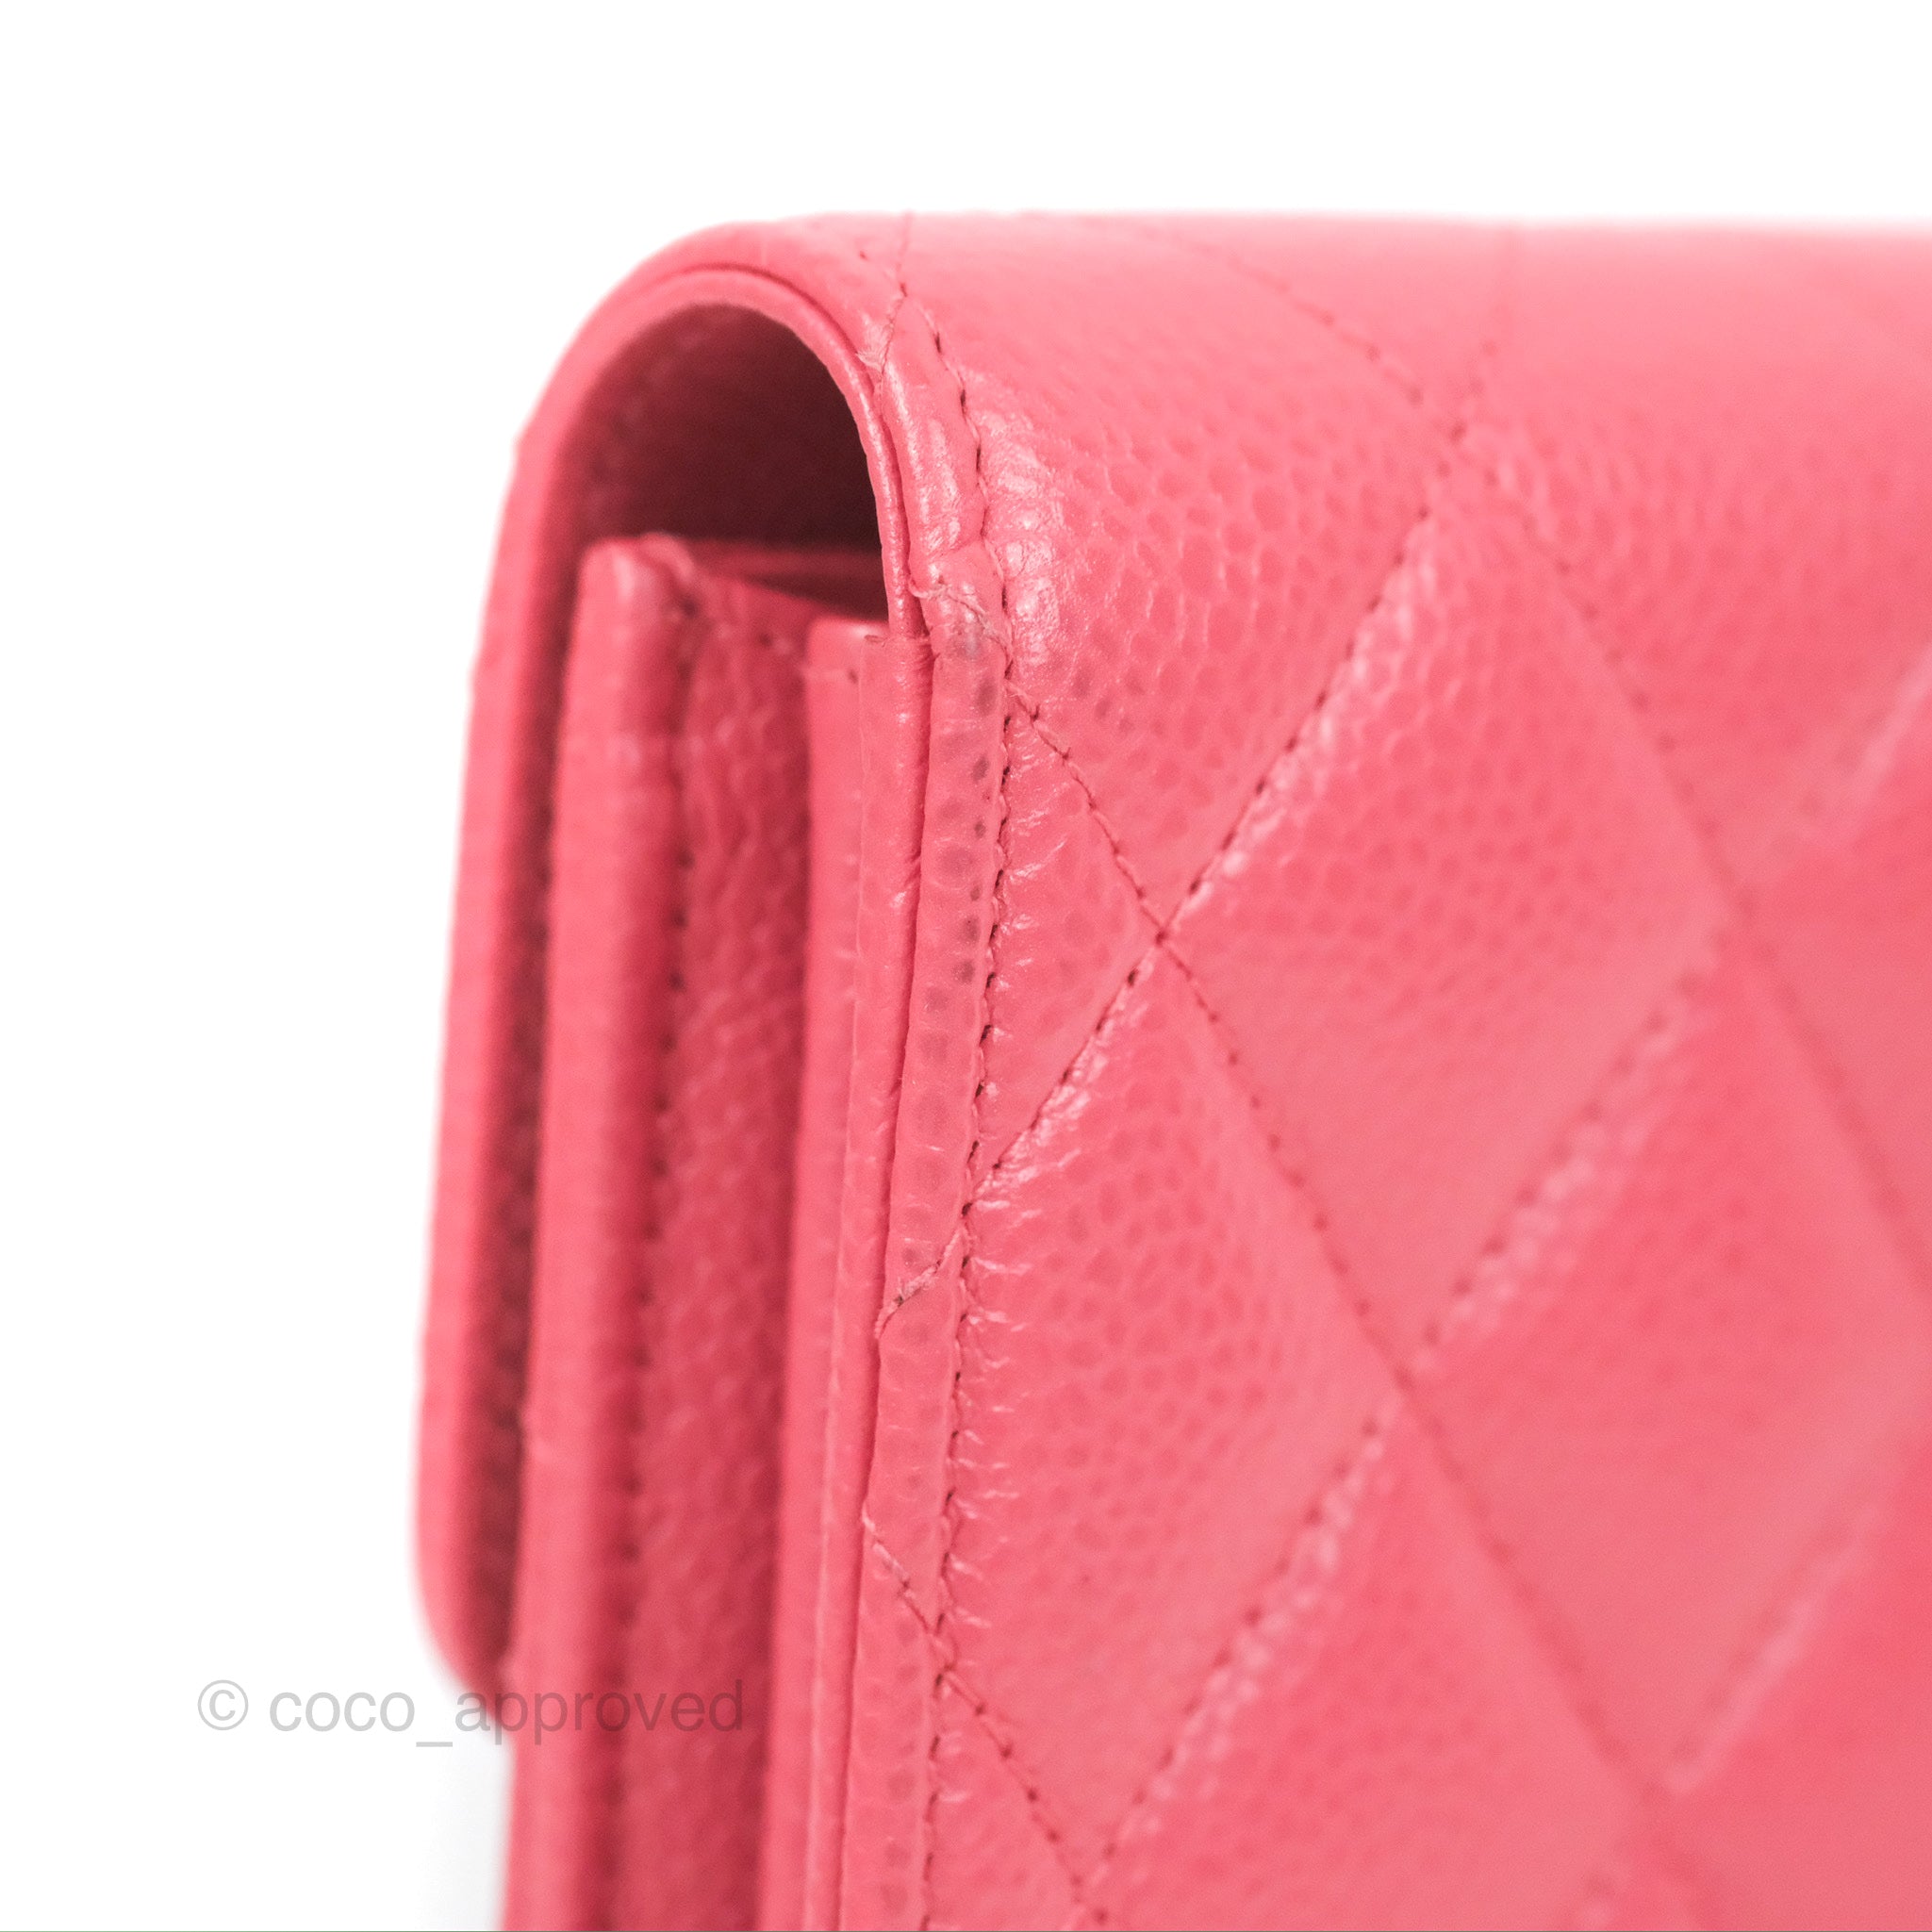 Chanel Quilted Classic Zip Long Wallet Pink Caviar Gold Hardware